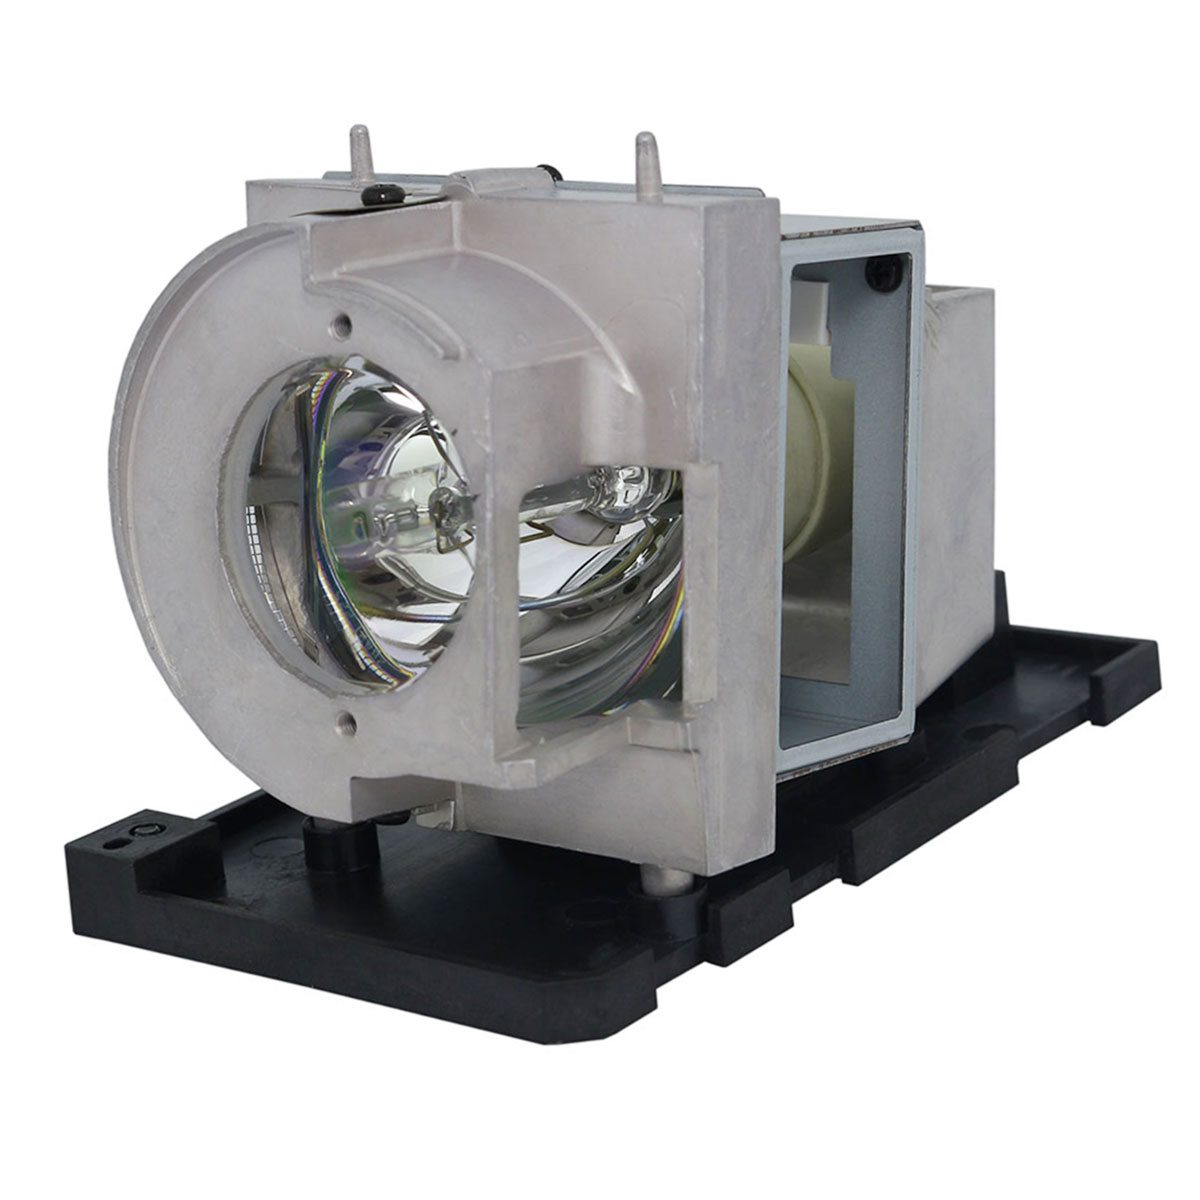 Original SP.71K01GC01 Replacement Lamp & Housing for Optoma Projectors - image 1 of 7